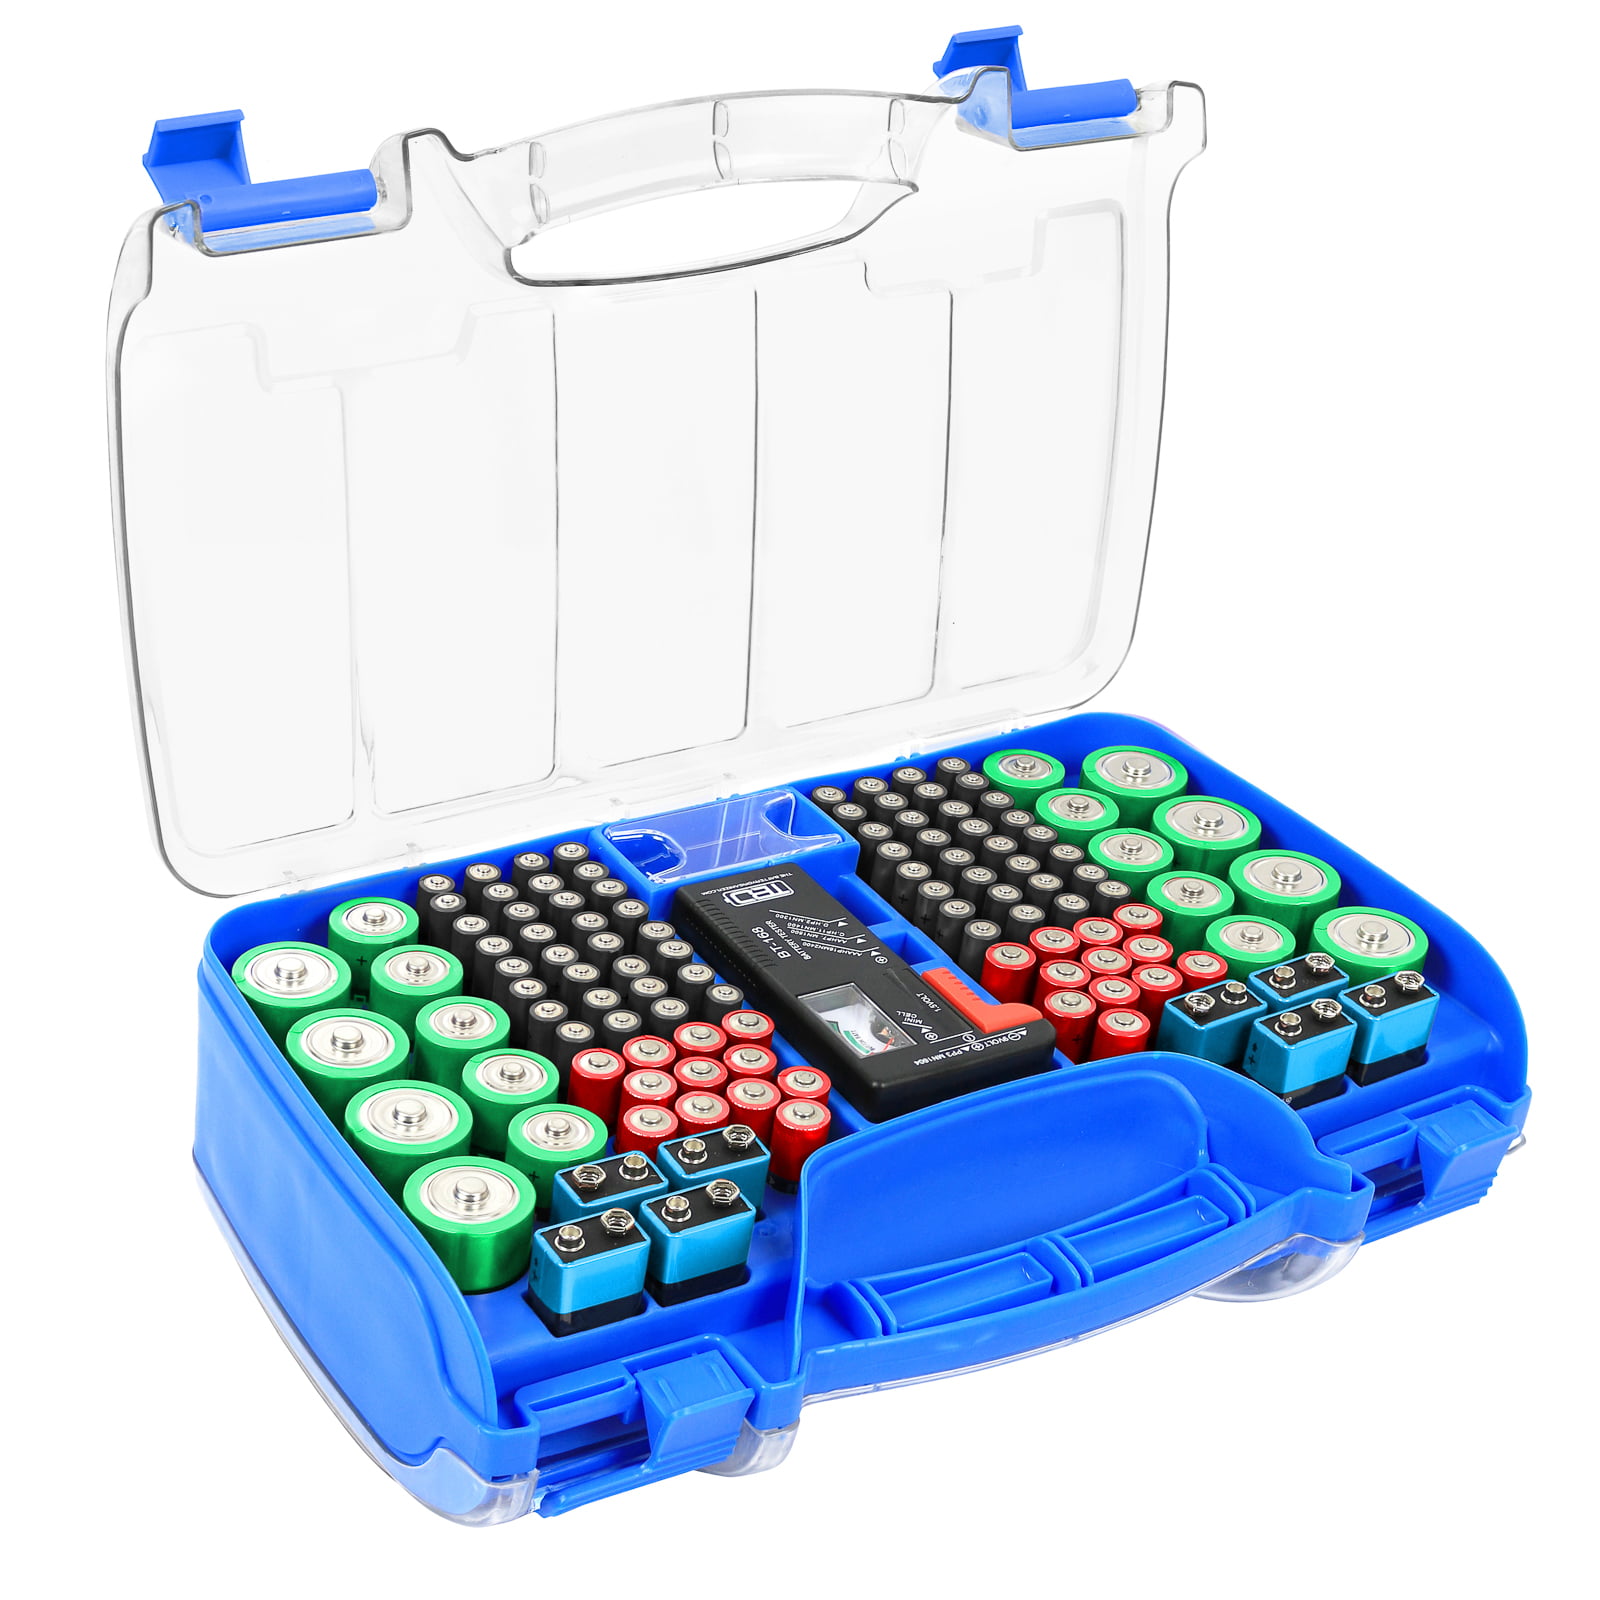 Bee Neat Battery Organizer and Storage Case with Tester - Battery